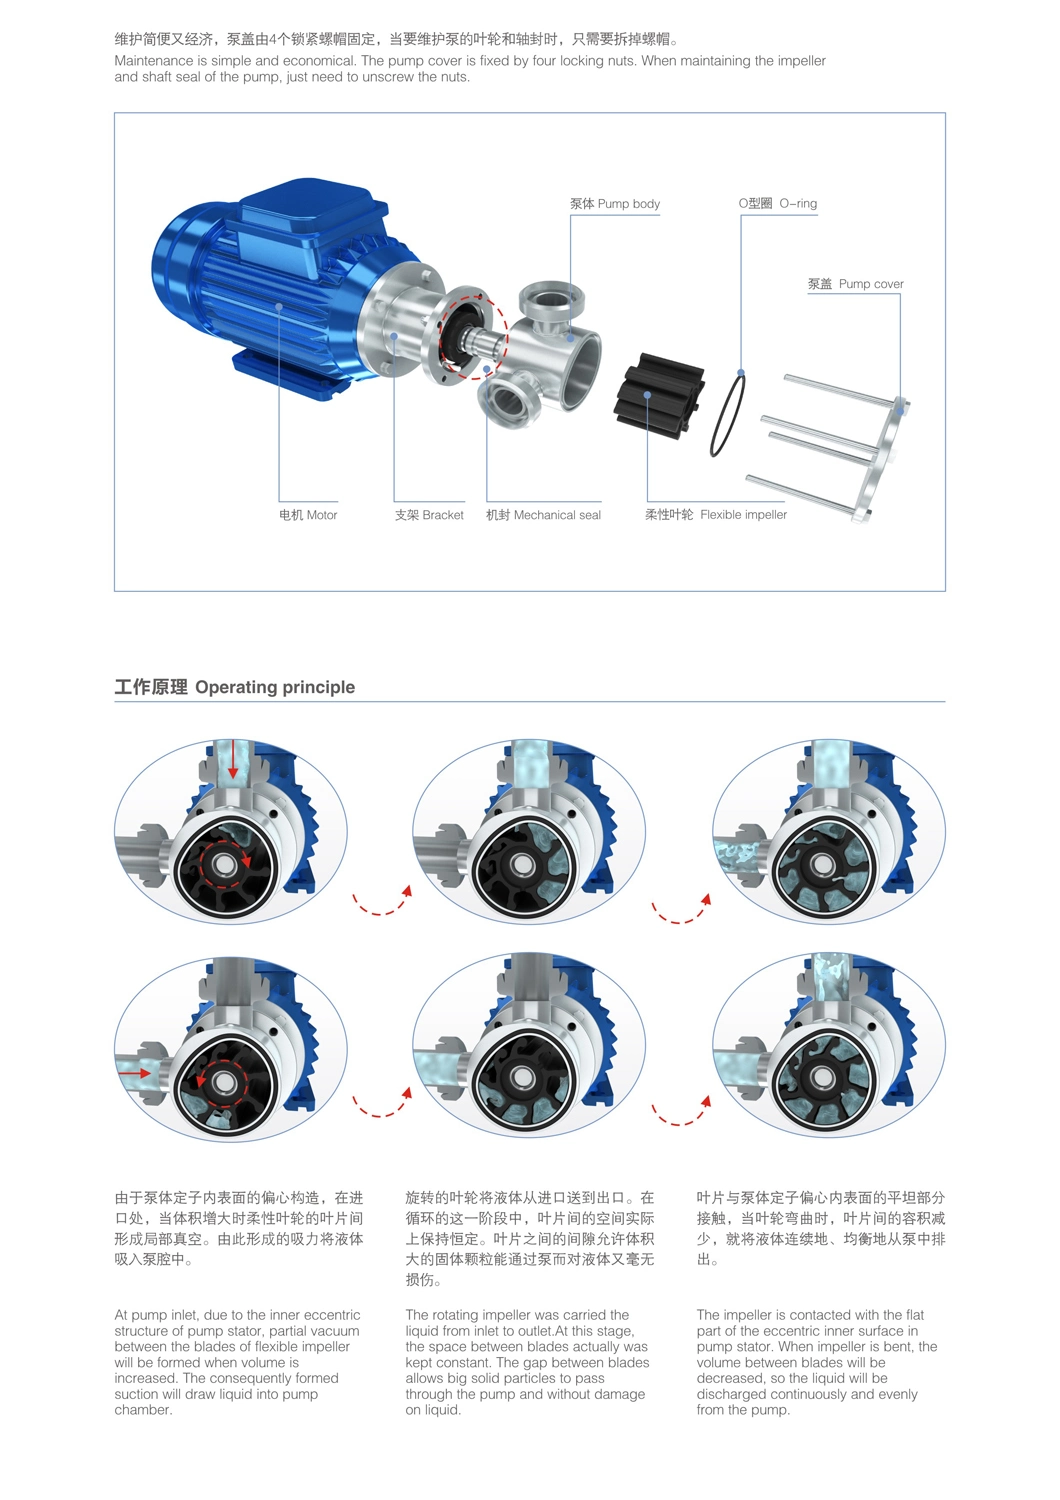 Donjoy Sanitary Flexible Impeller Pump Manufacturer in China